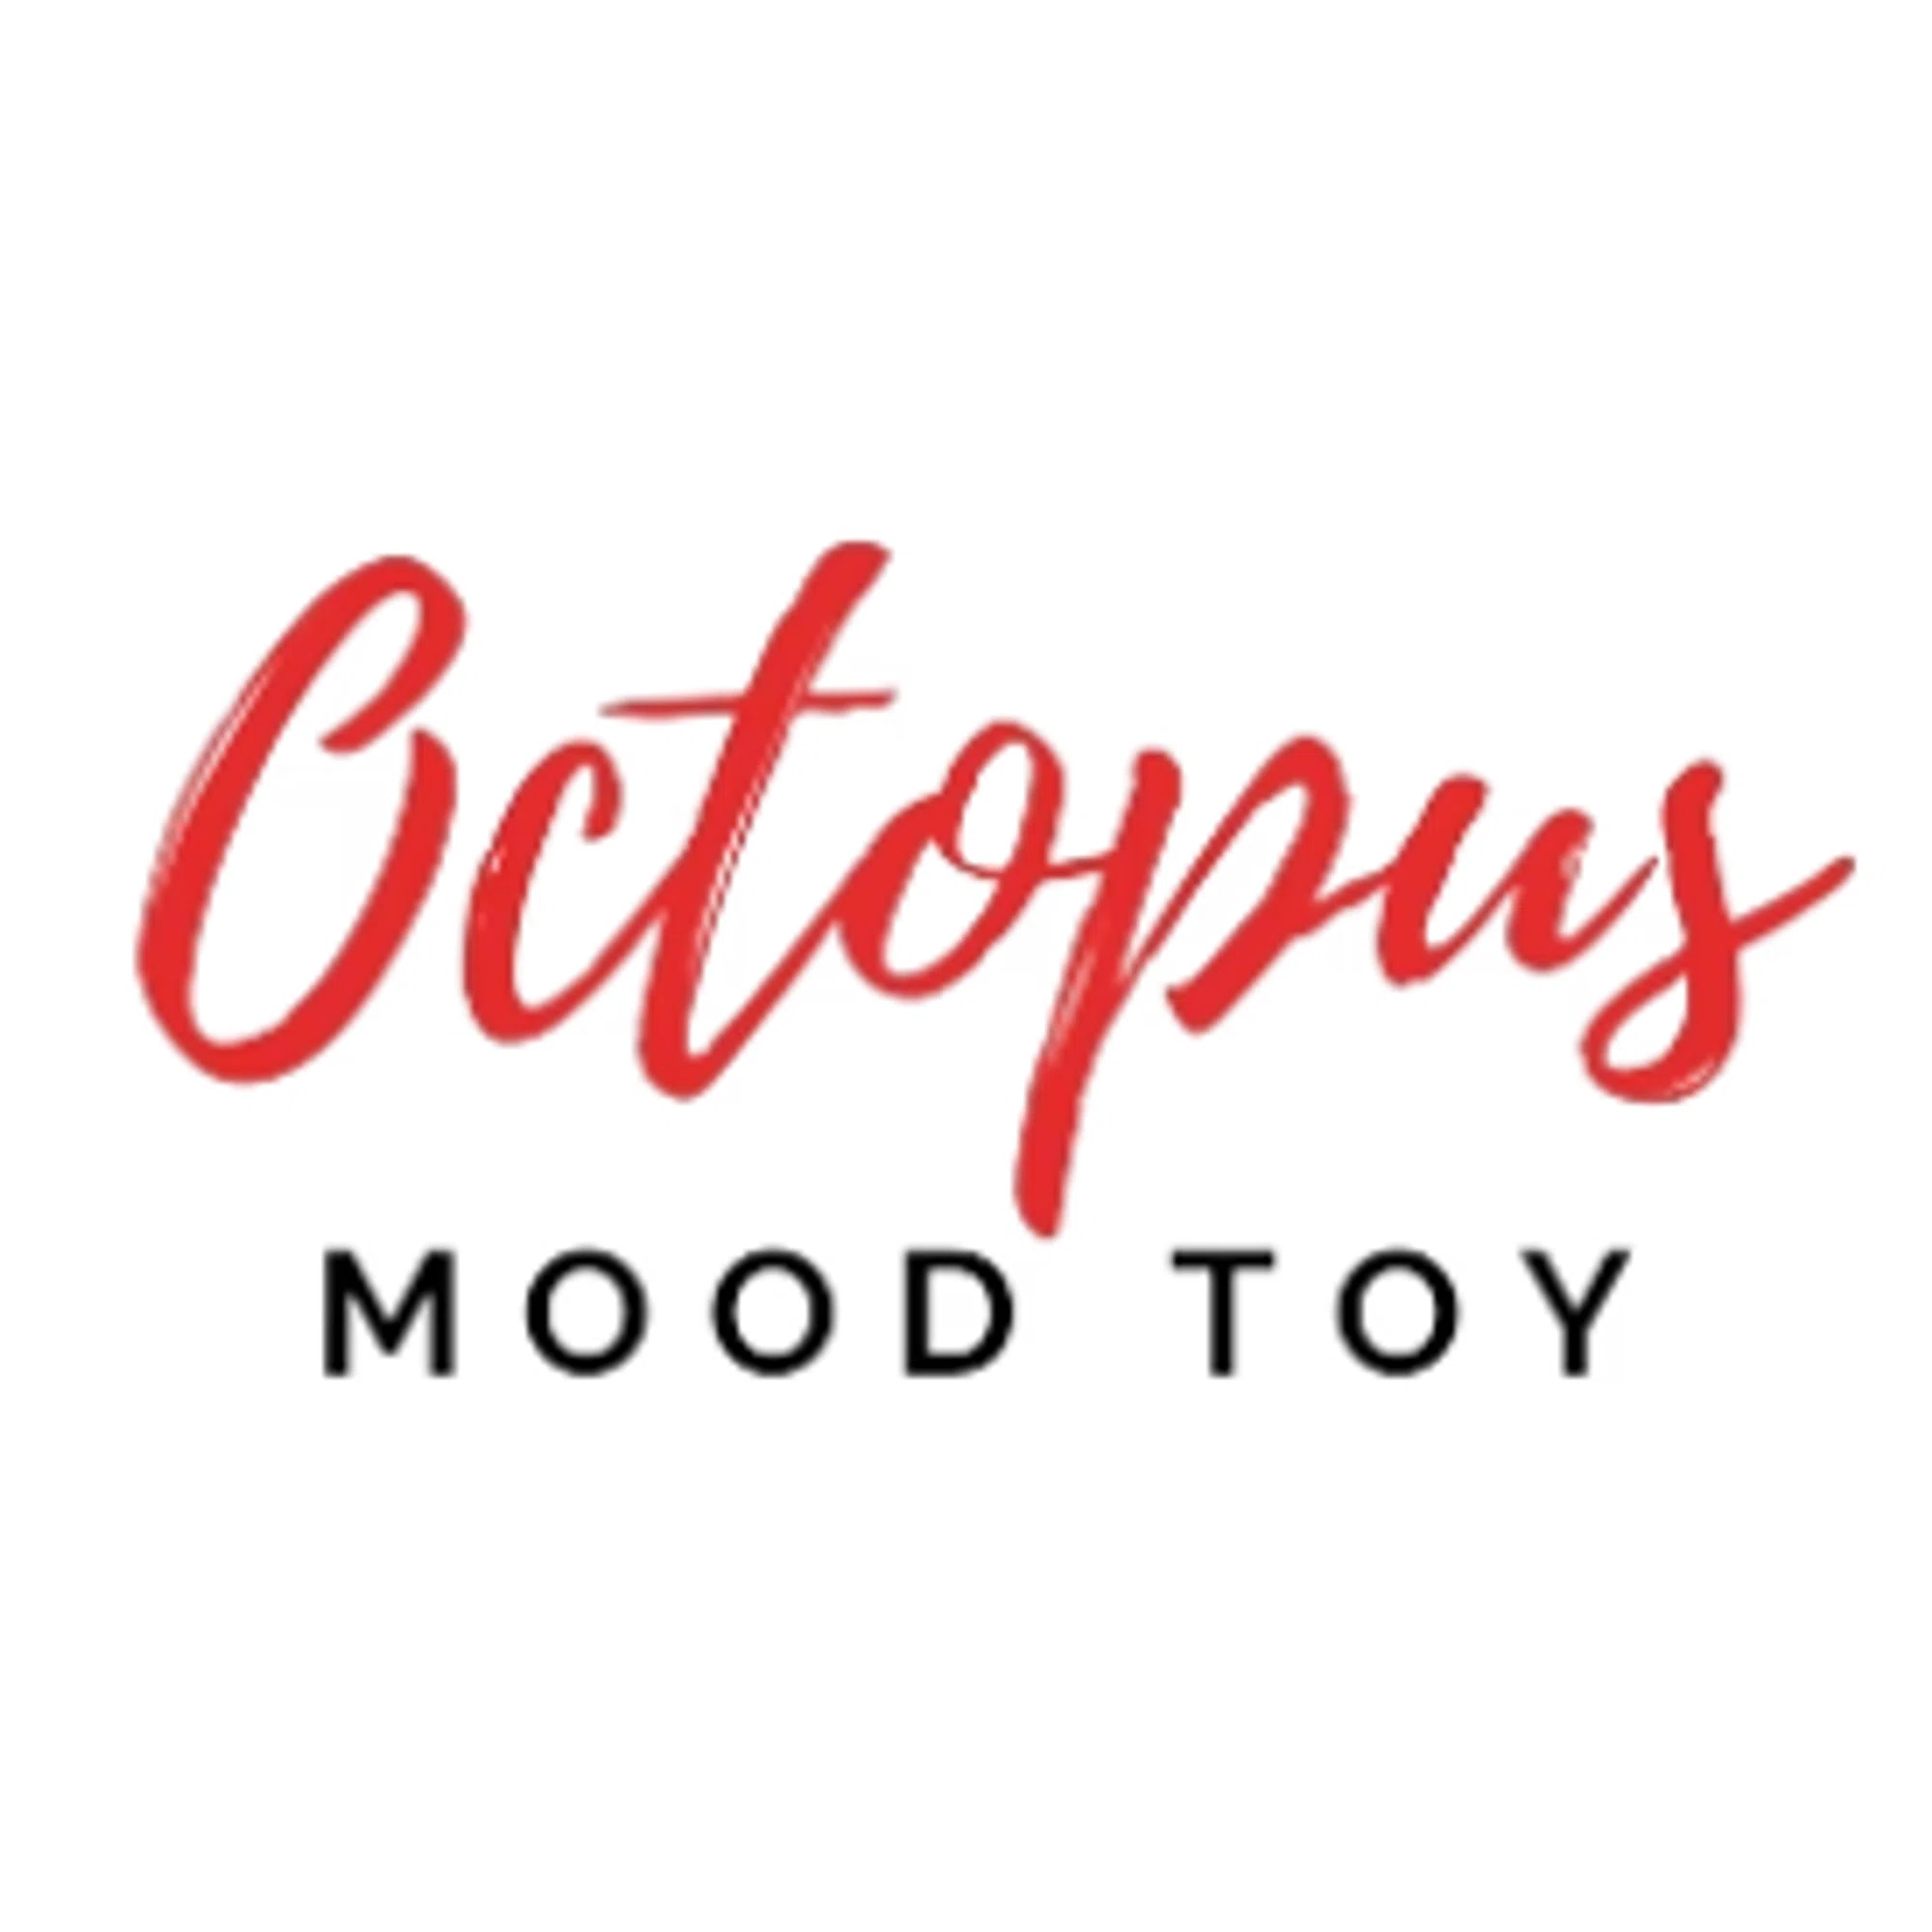 Octopus Mood Toy